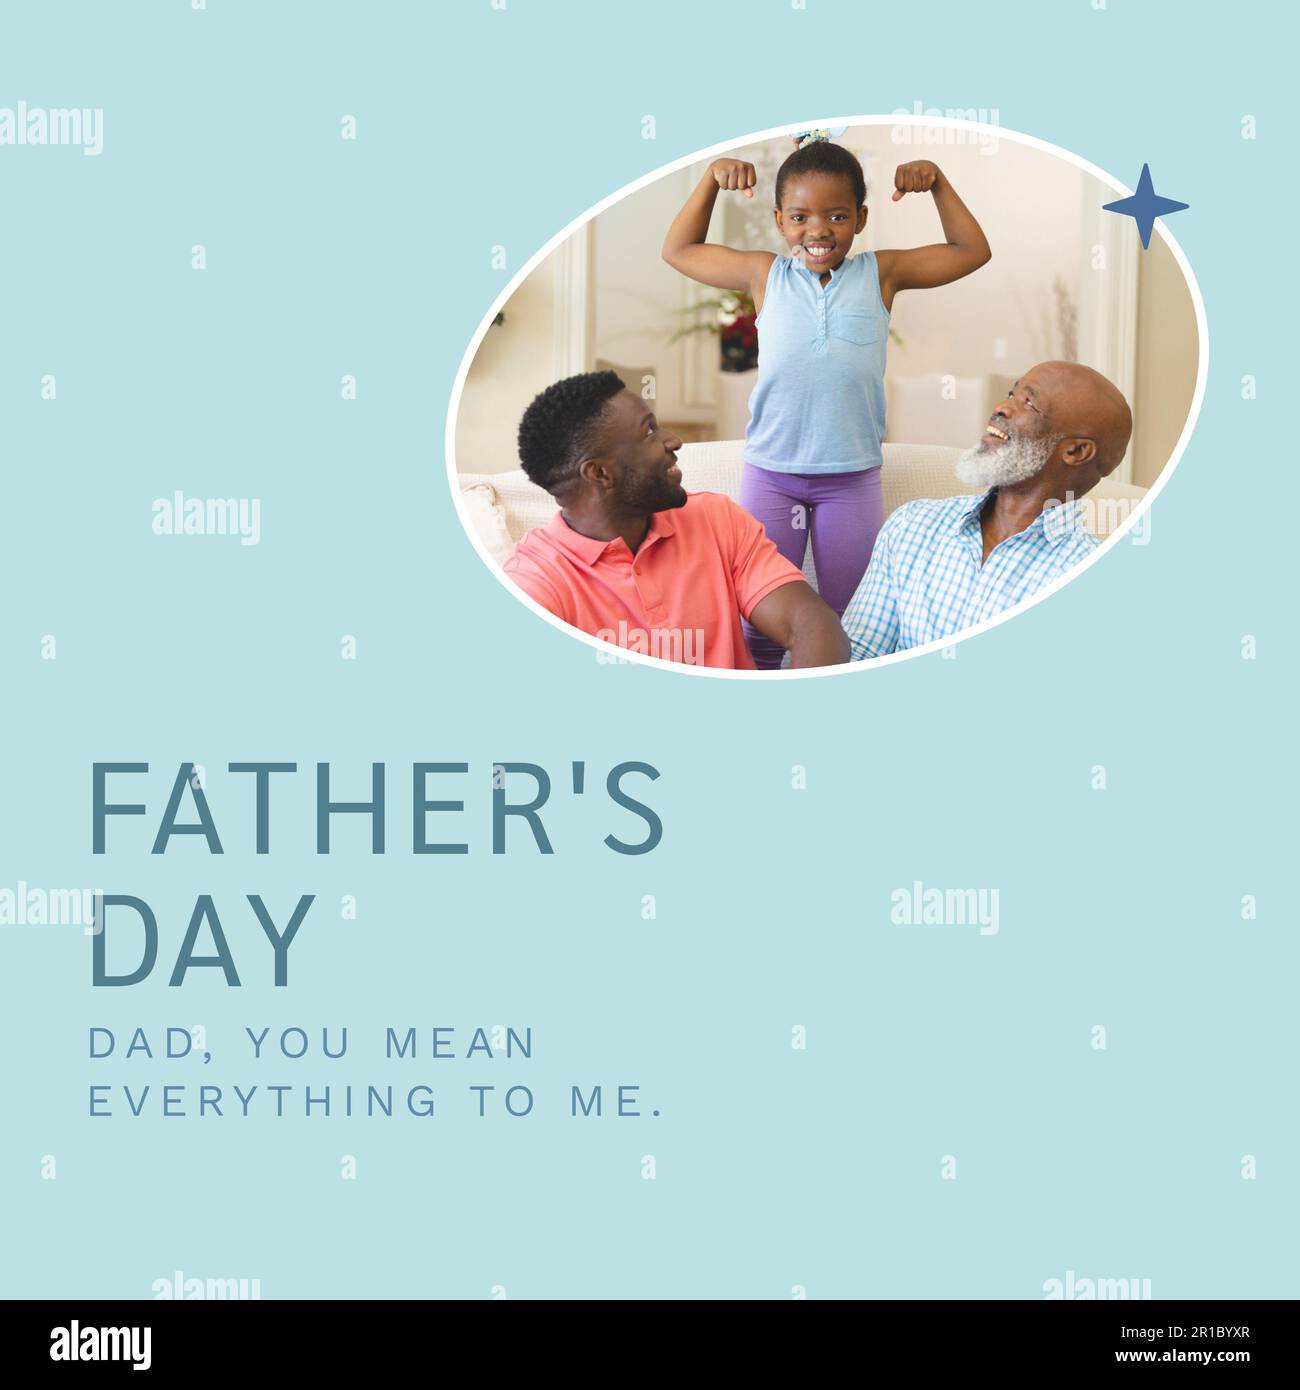 Composition of father's day text over african american grandfather, father and daughter Stock Photo